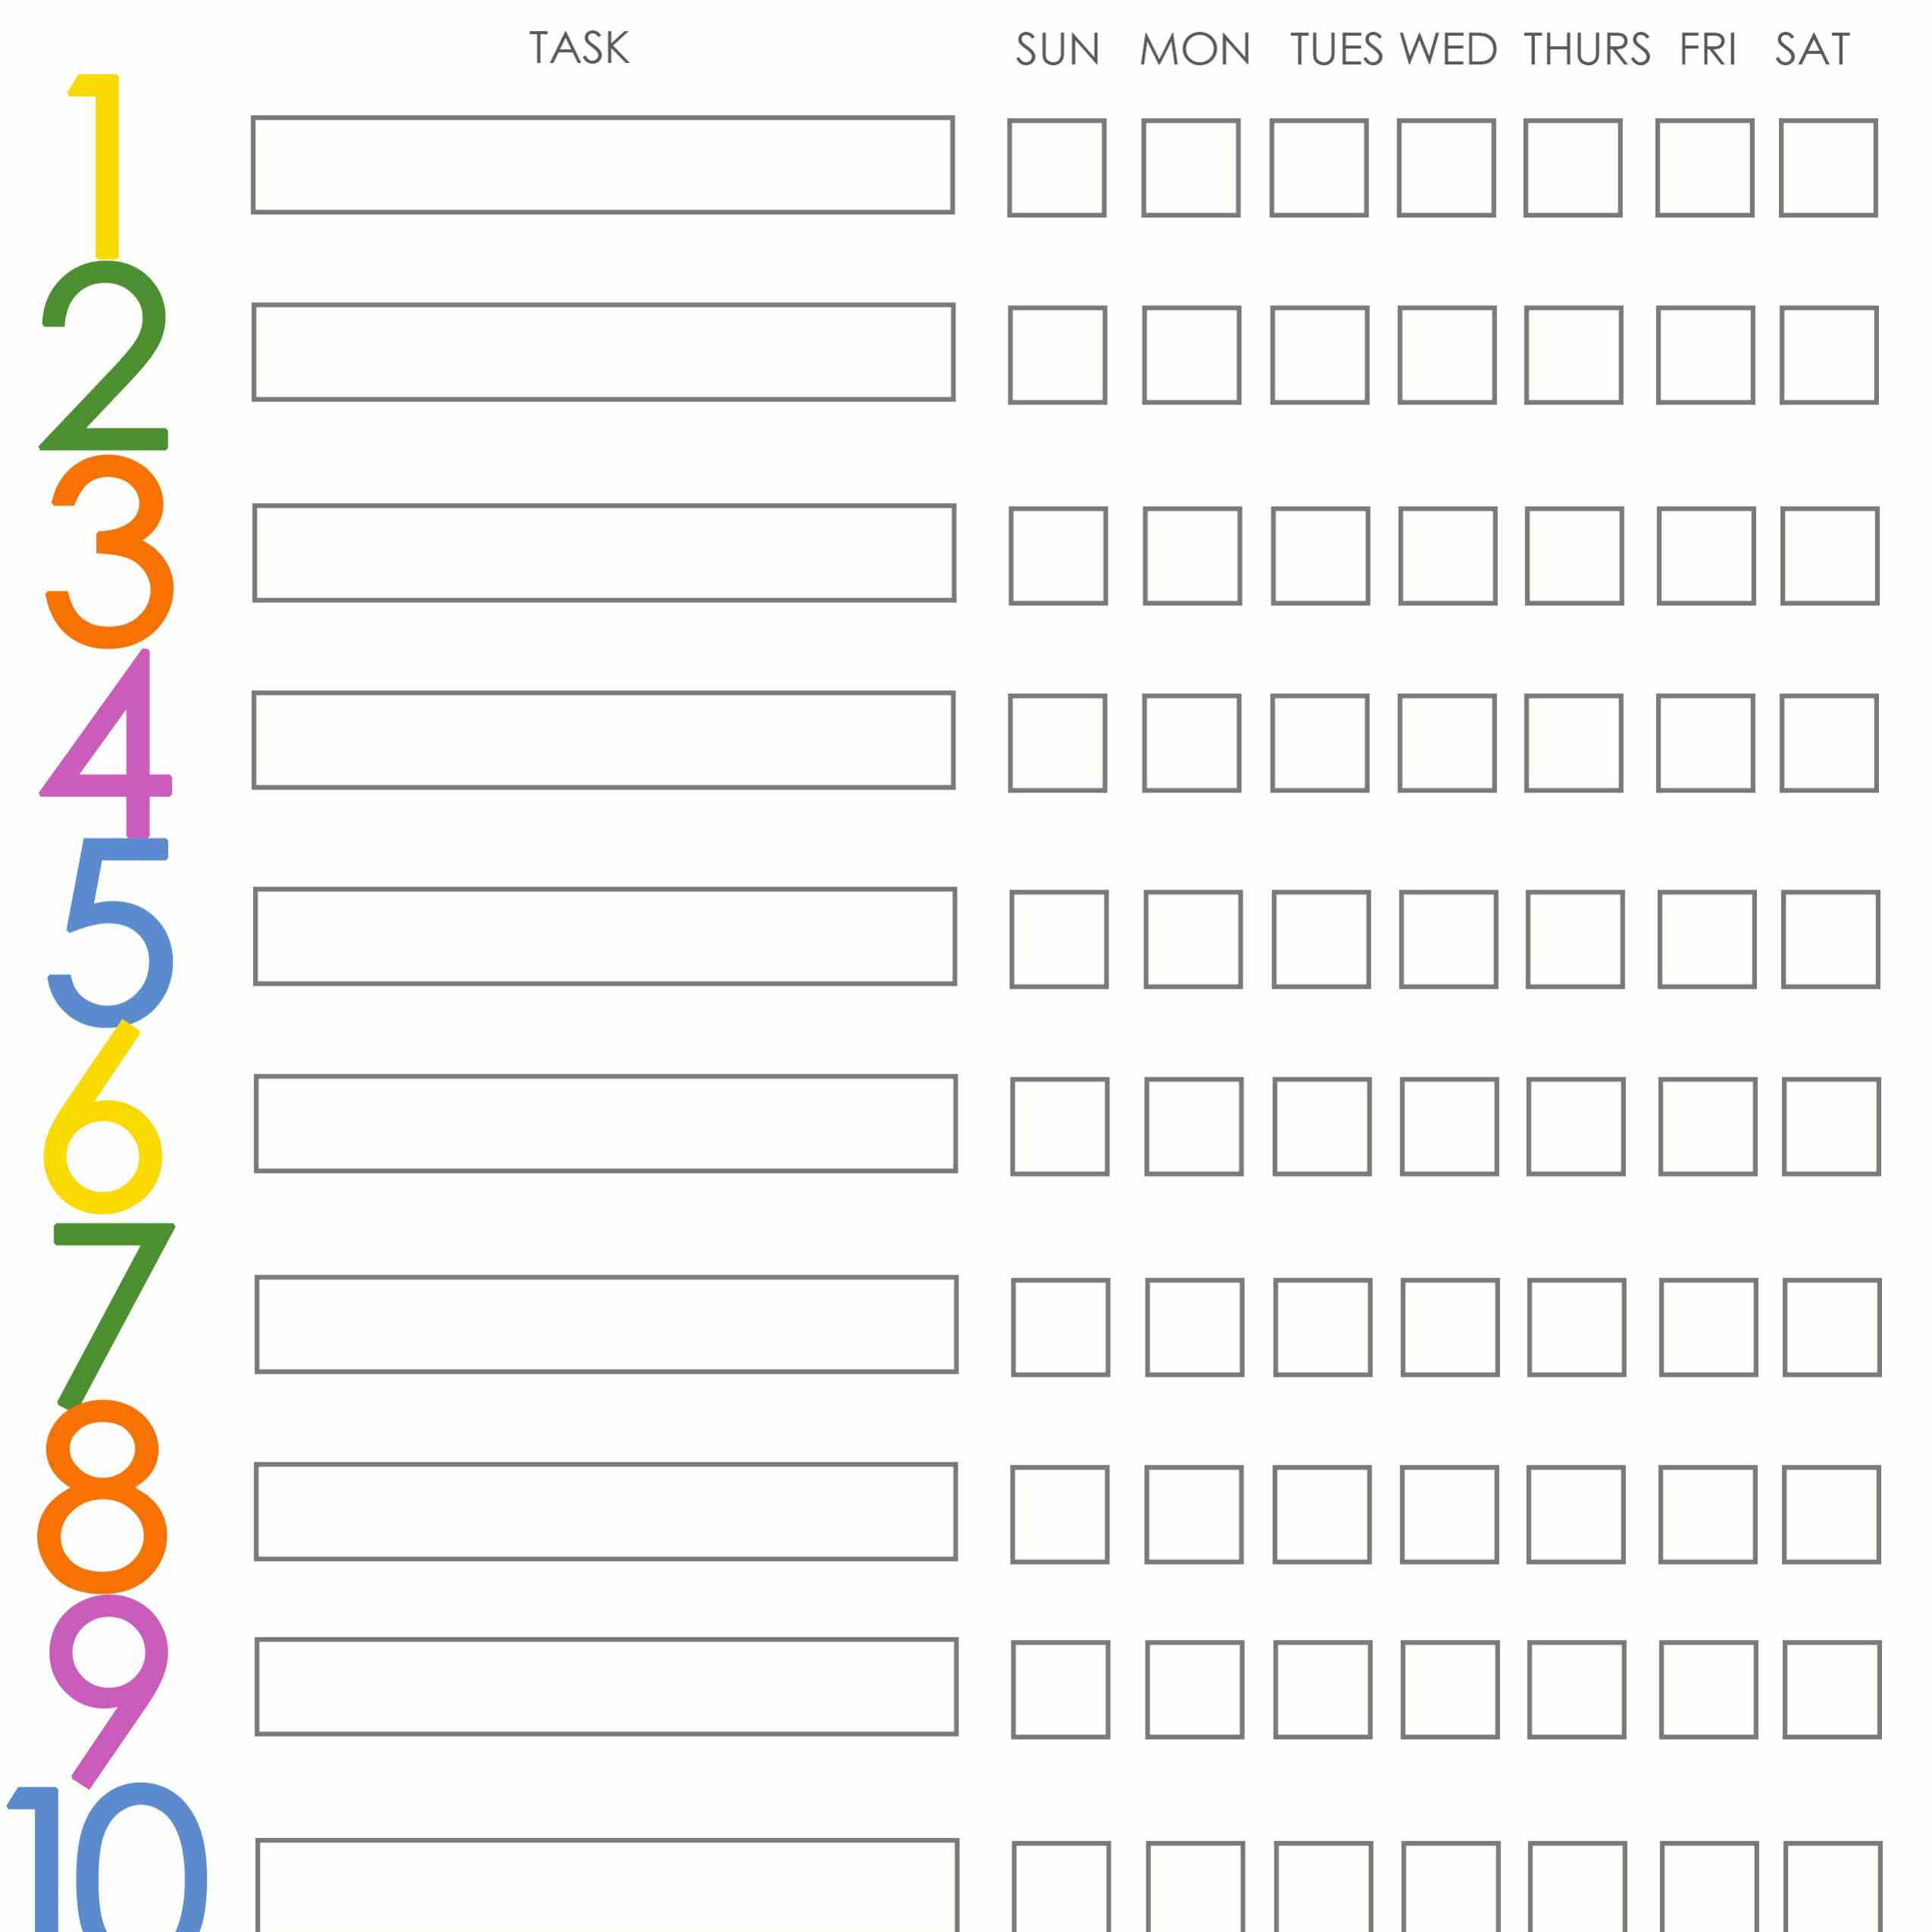 children-s-allowance-spreadsheet-throughout-free-printable-weekly-chore-charts-db-excel